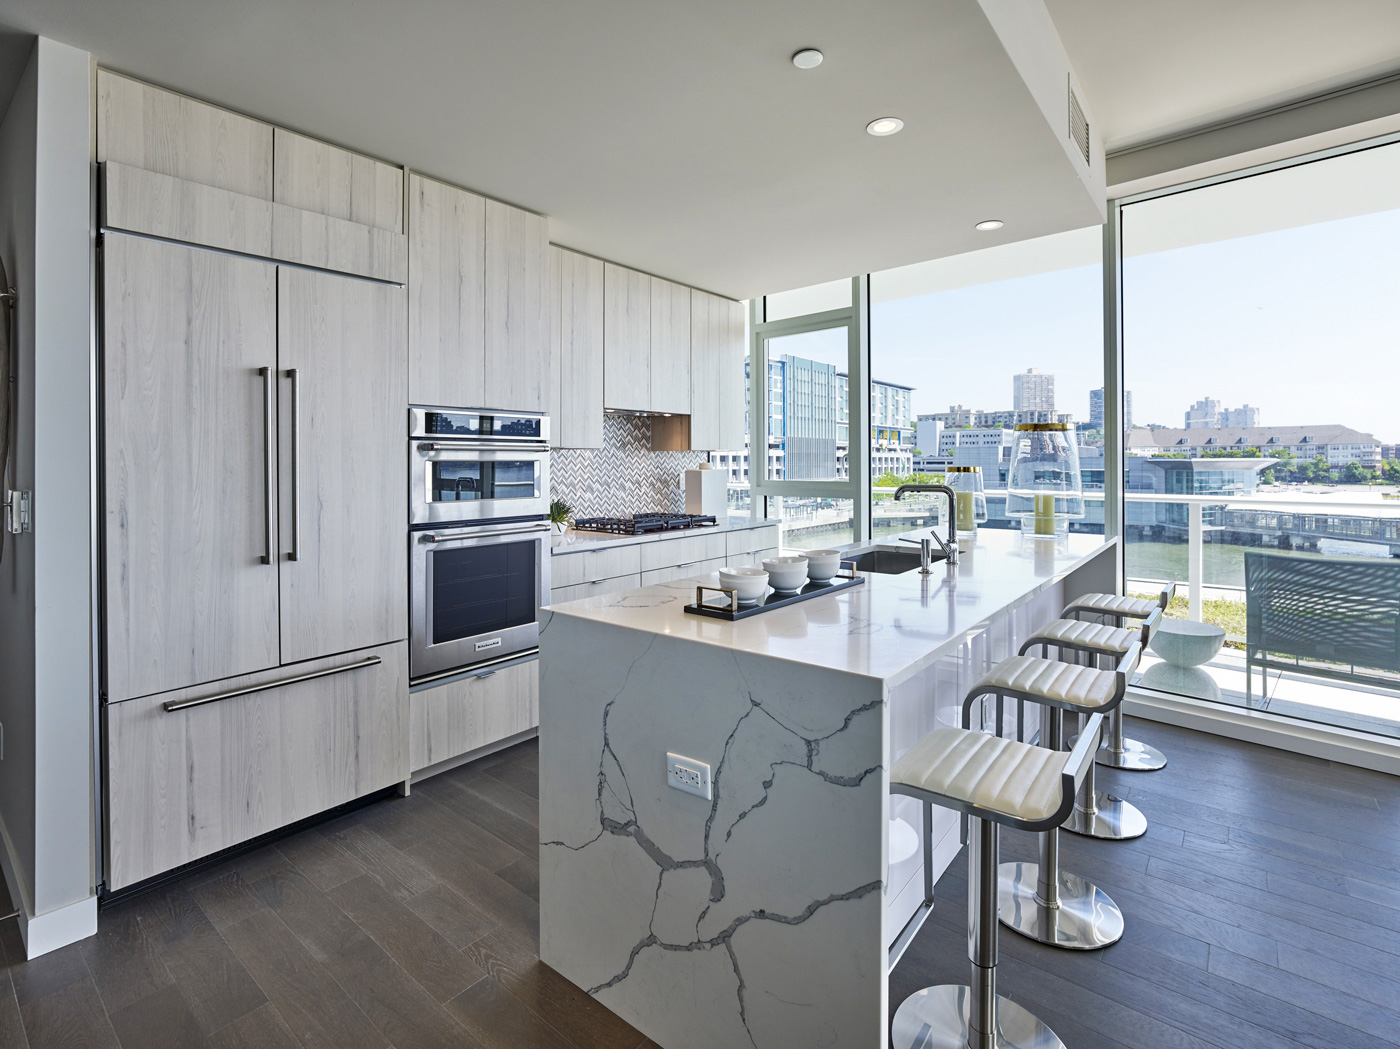 Modern white apartment kitchen merchandised with marble countertops and sleek countertops along with city views in New Jersey.